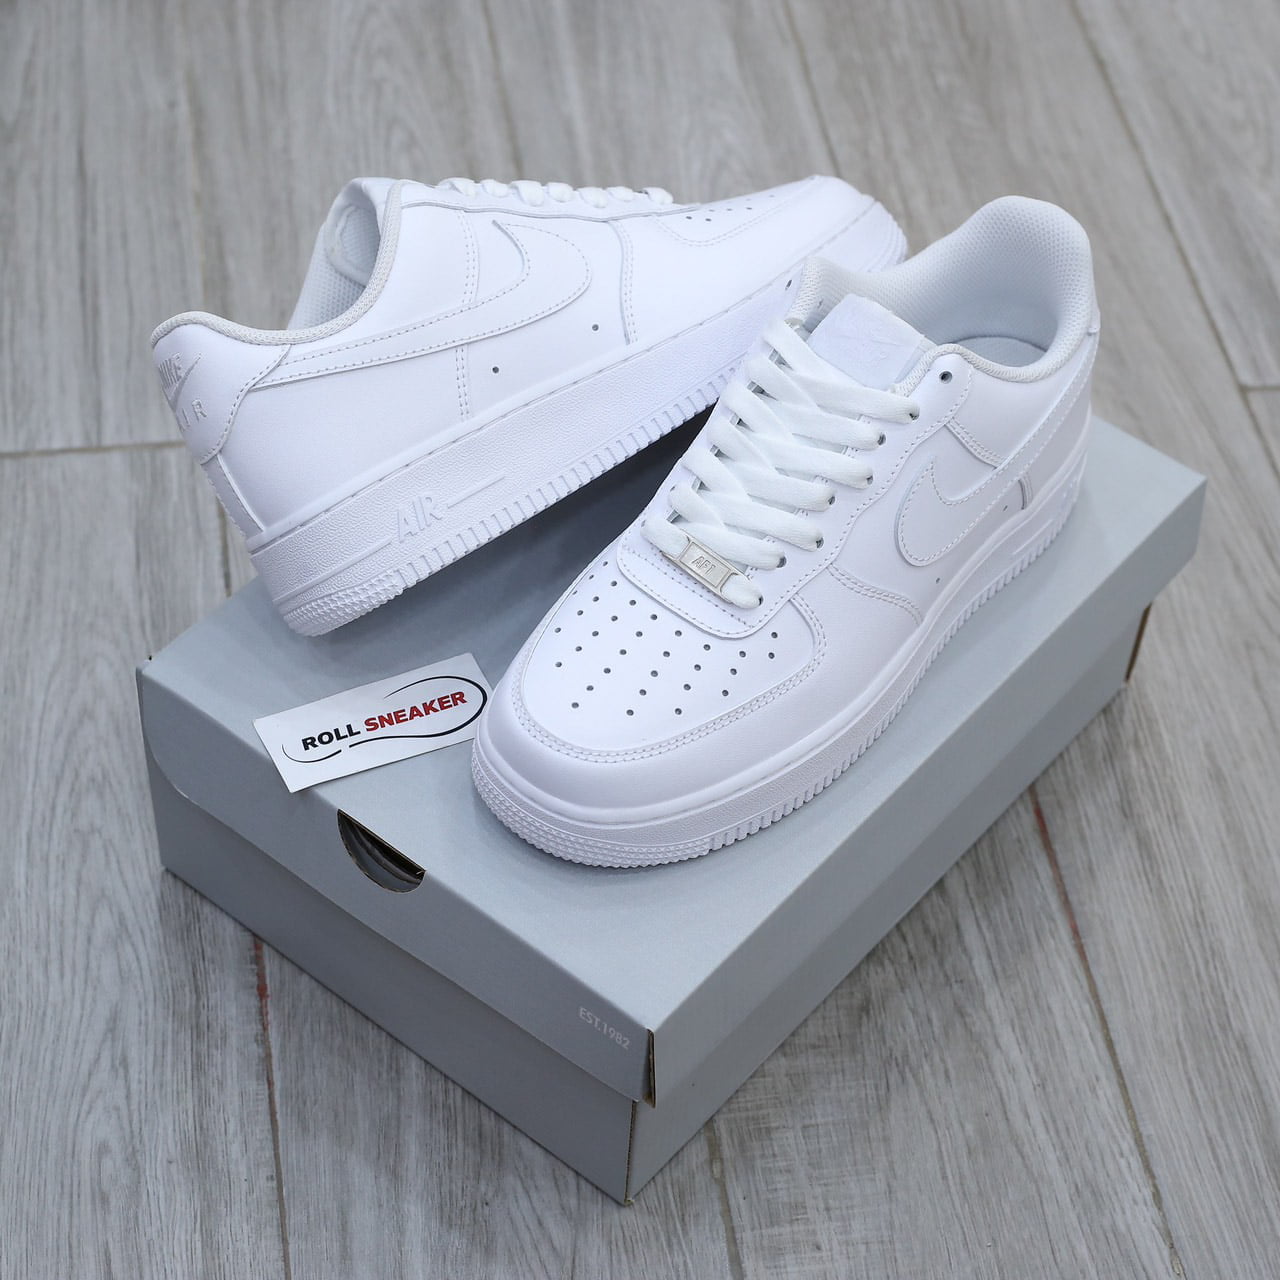 giày nike air force 1 trắng full white like auth